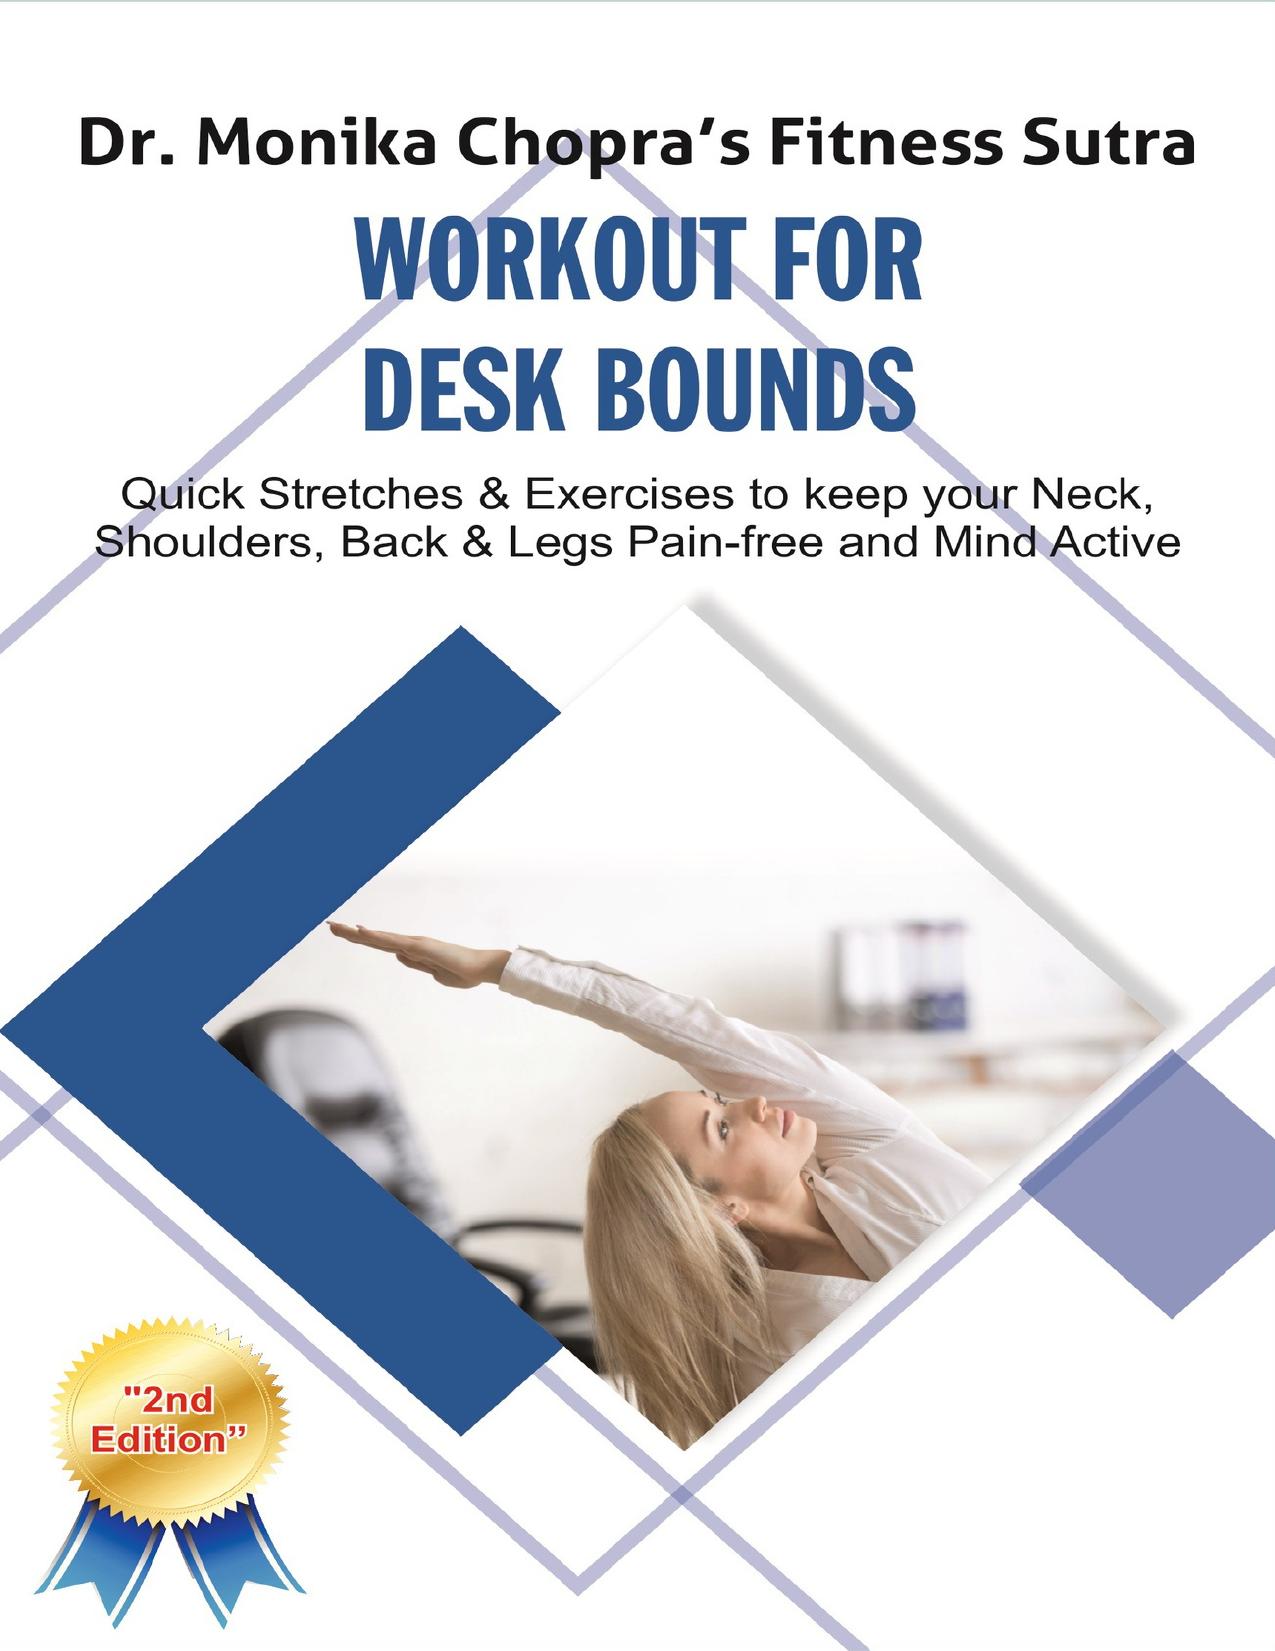 Workout for Desk Bounds: Quick Stretches & Exercises to keep your Neck, Shoulders, Back & Legs Pain-free and Mind Active (Fitness Sutra Book 1) by Chopra Dr. Monika